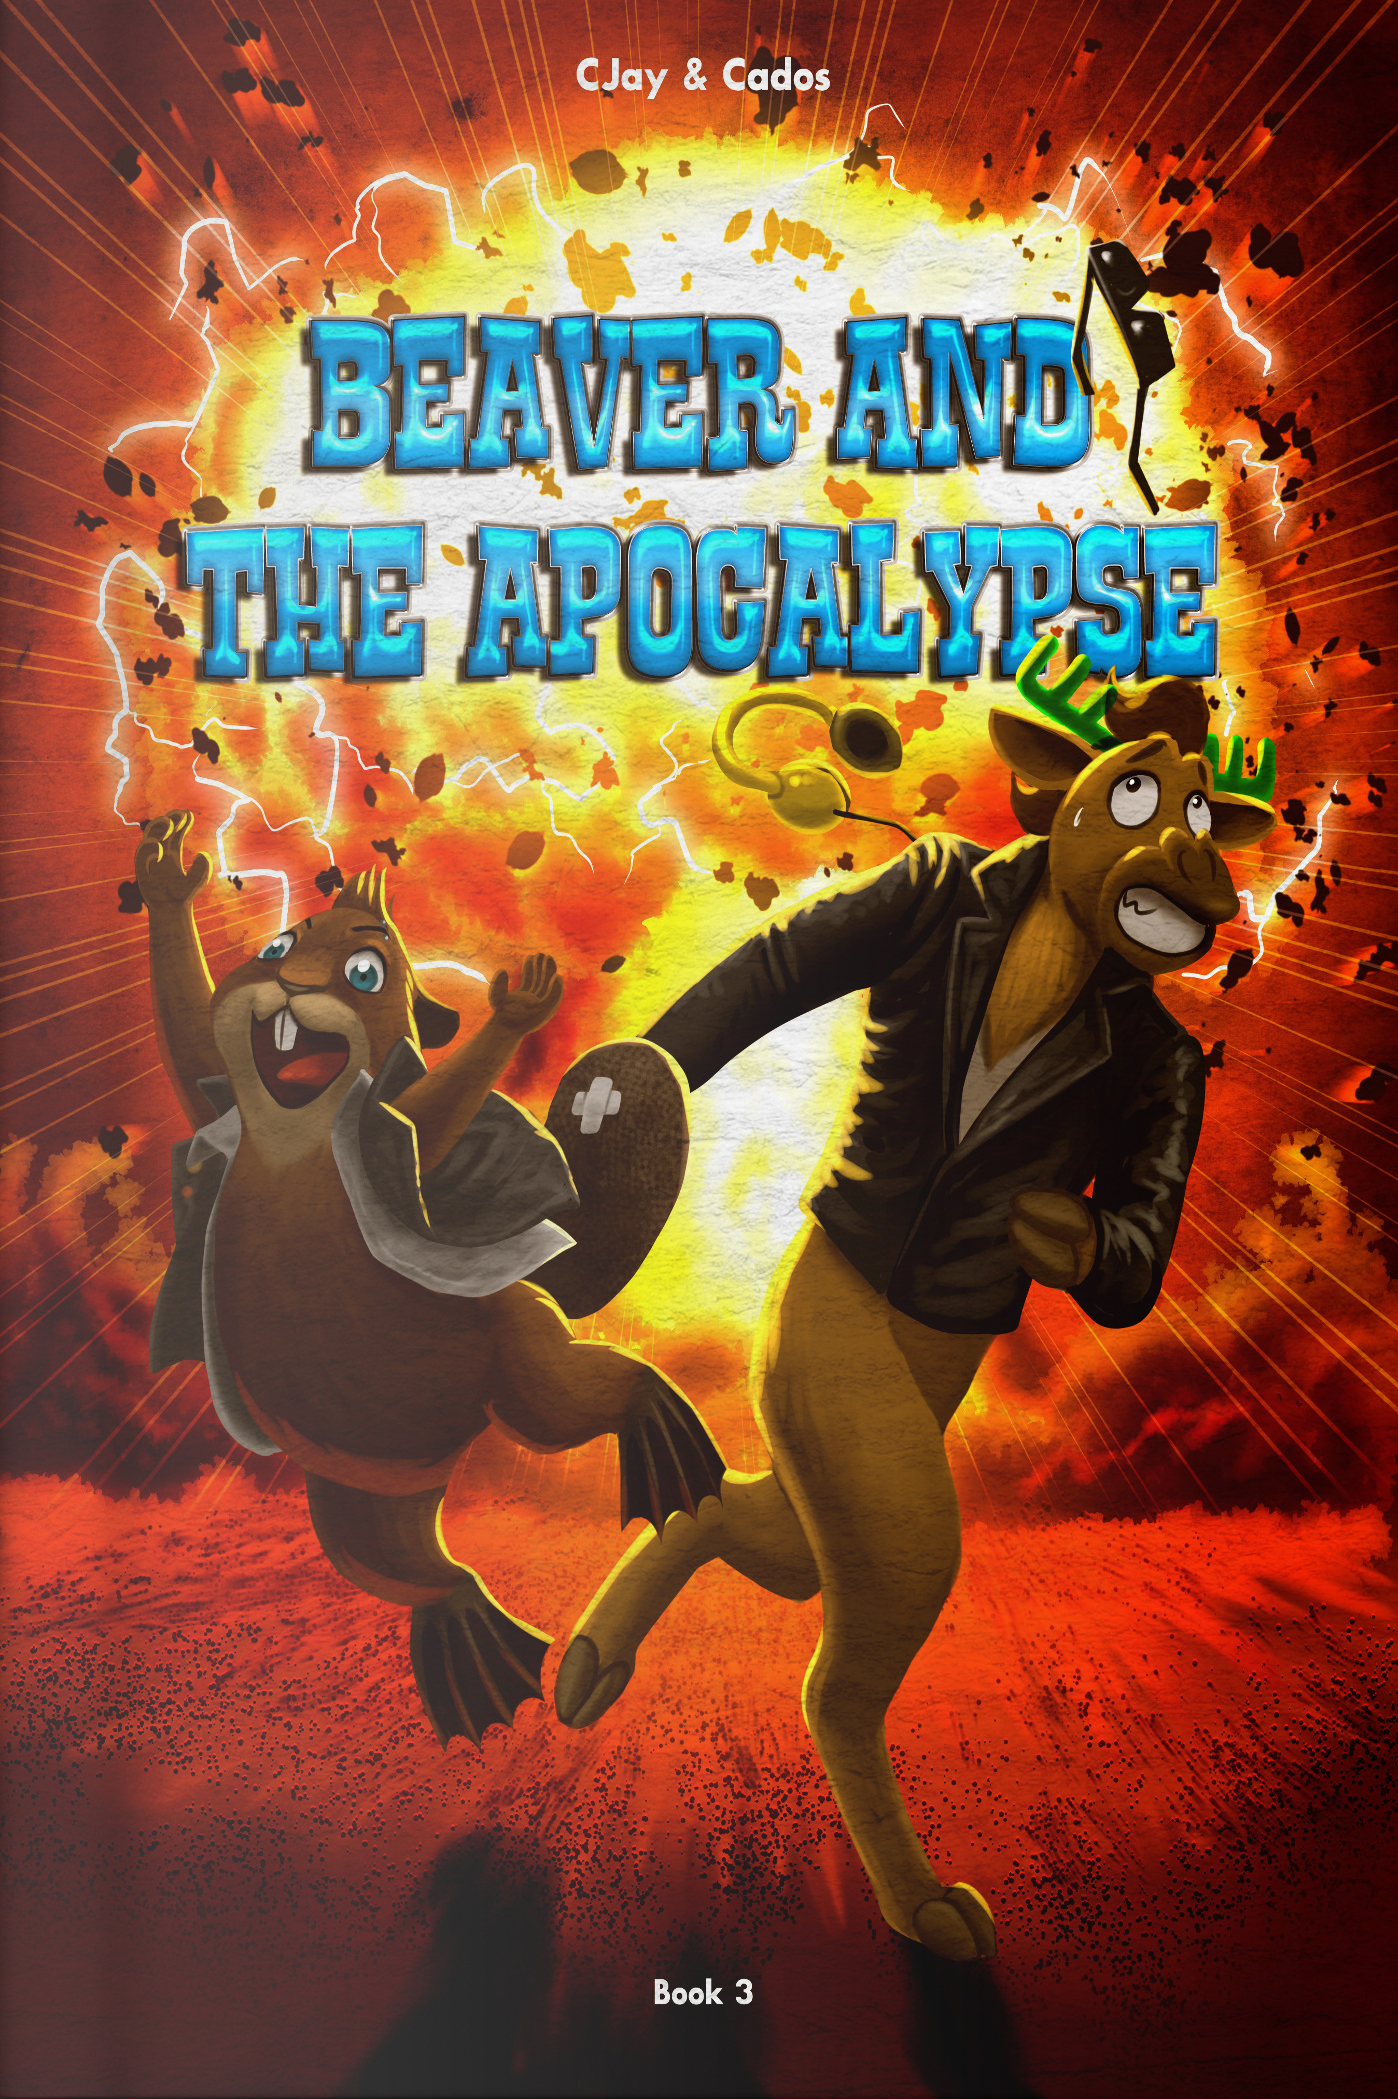 Beaver, Moose, Gontran, and Azel have to overcome a cataclysm of biblical proportions.